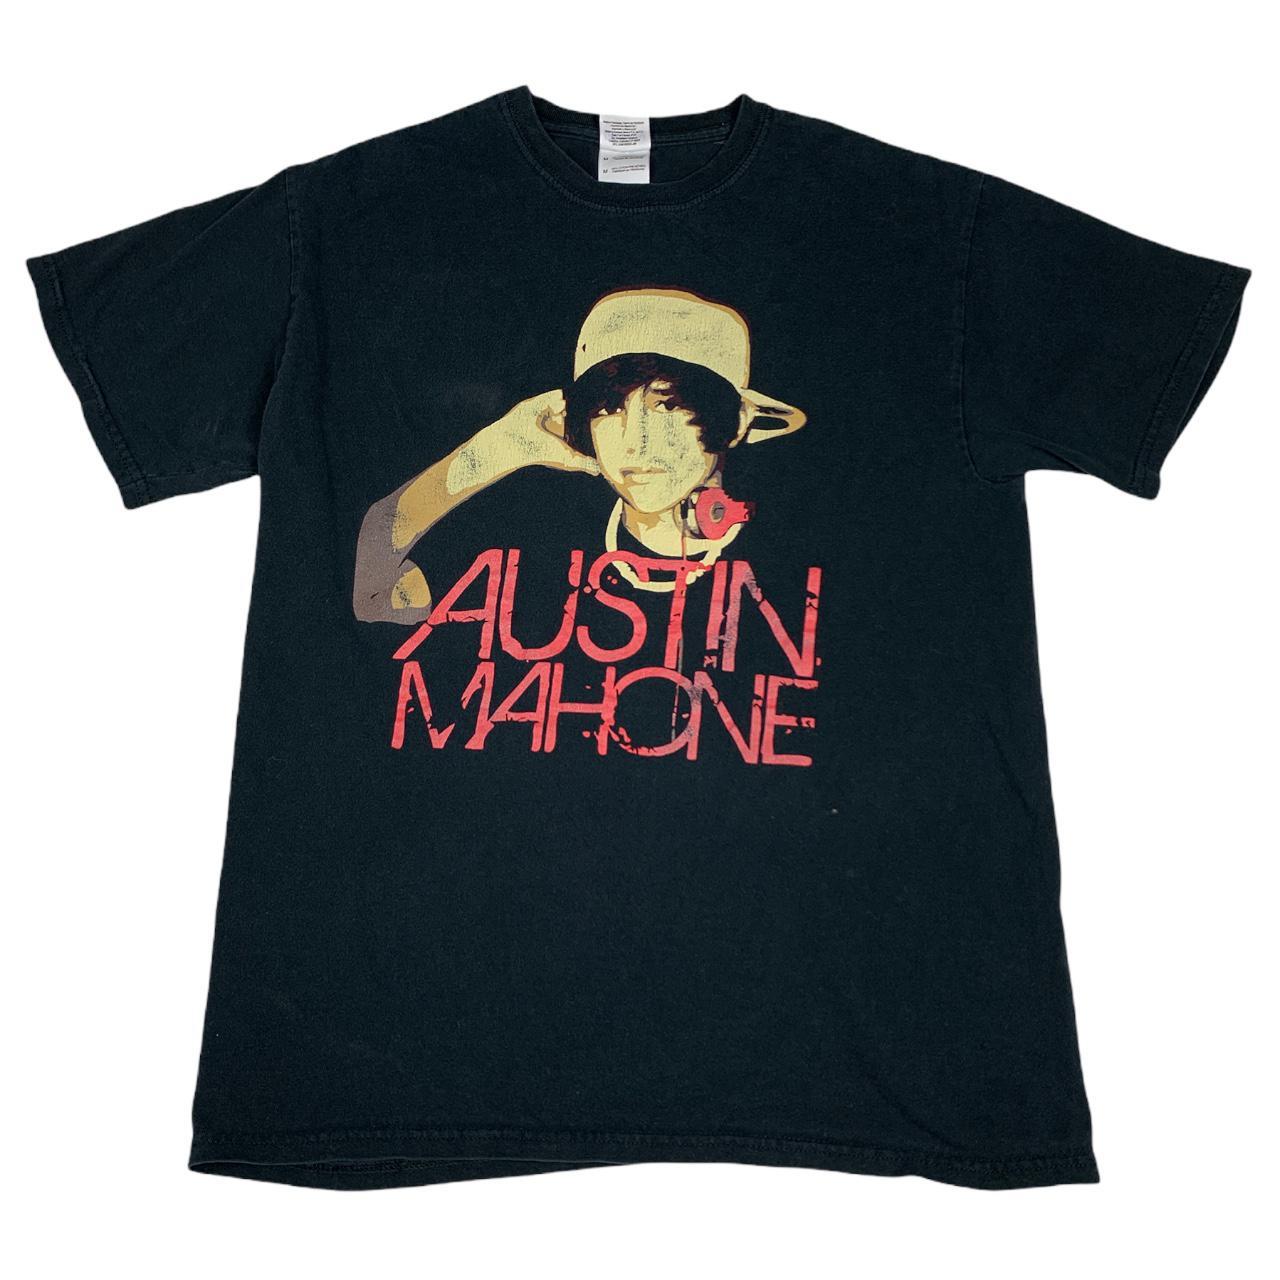 Product Image 1 - AUSTIN MAHONE TEE

This late y2k